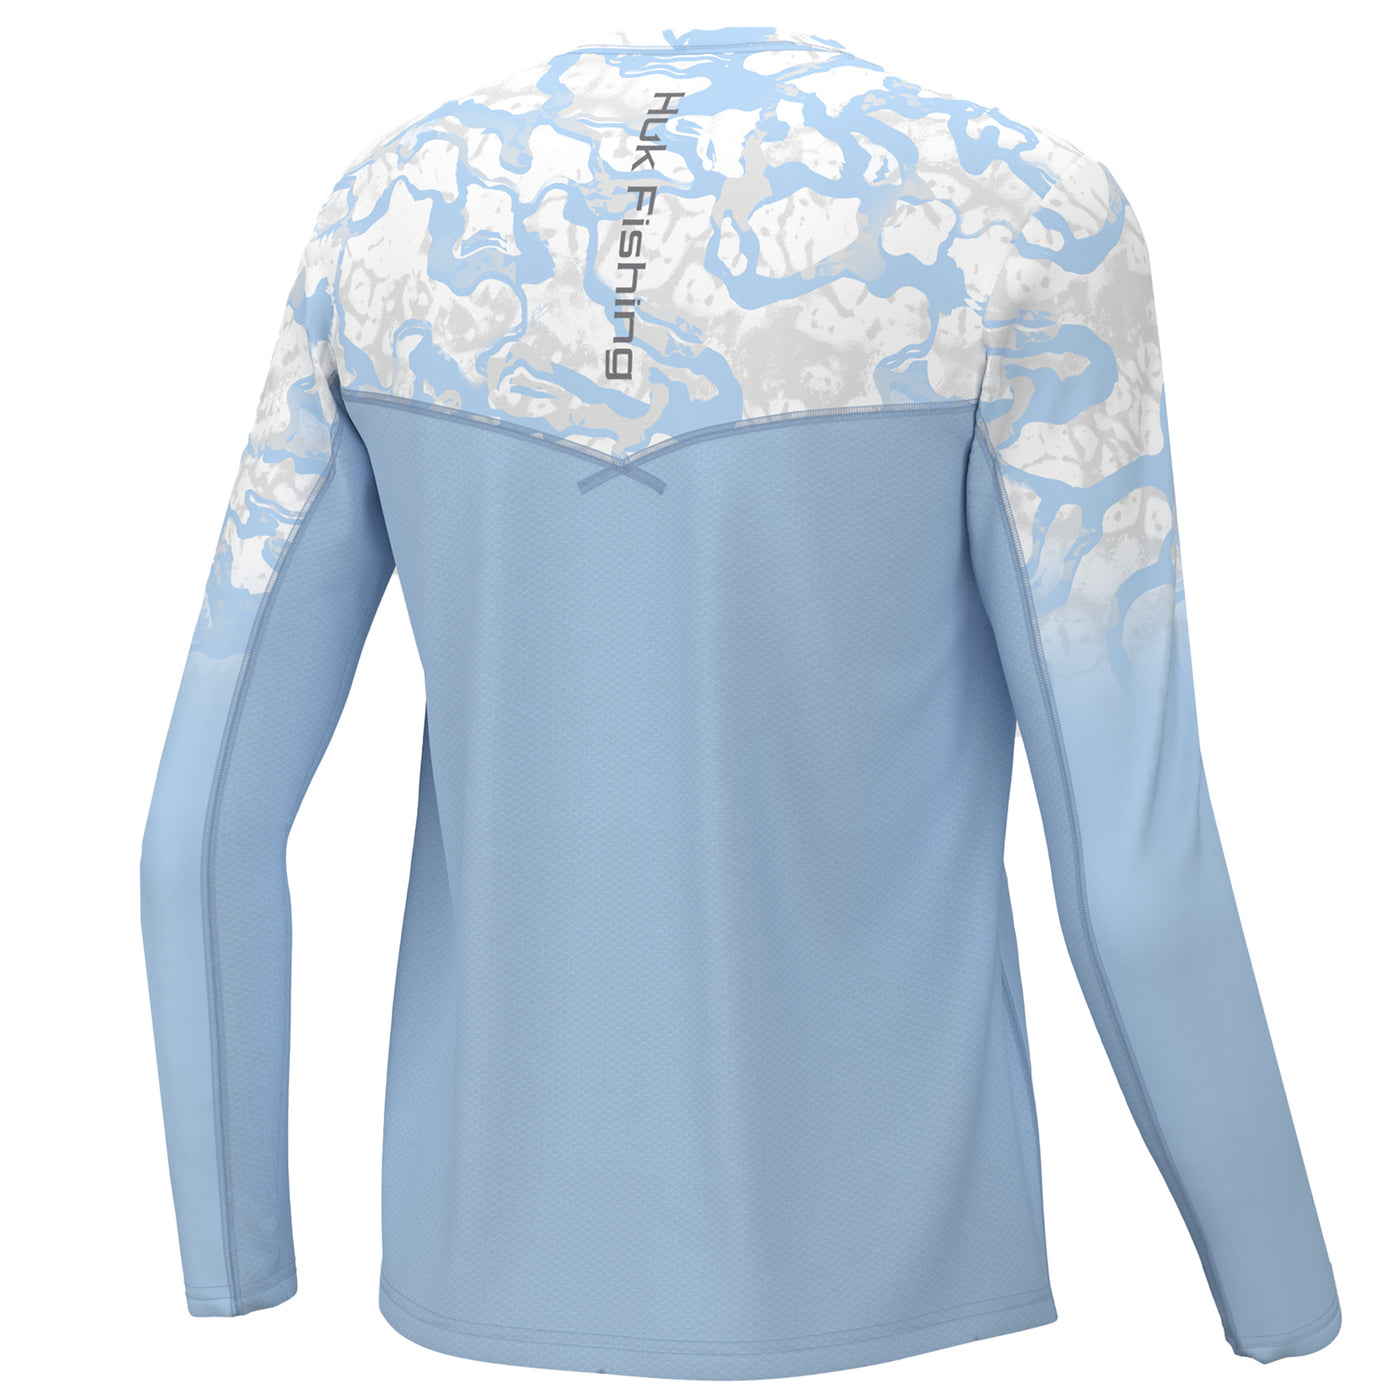 HUK Women's Pursuit Solid Long Sleeve, Fishing Shirt, Coral Reef, S :  : Fashion